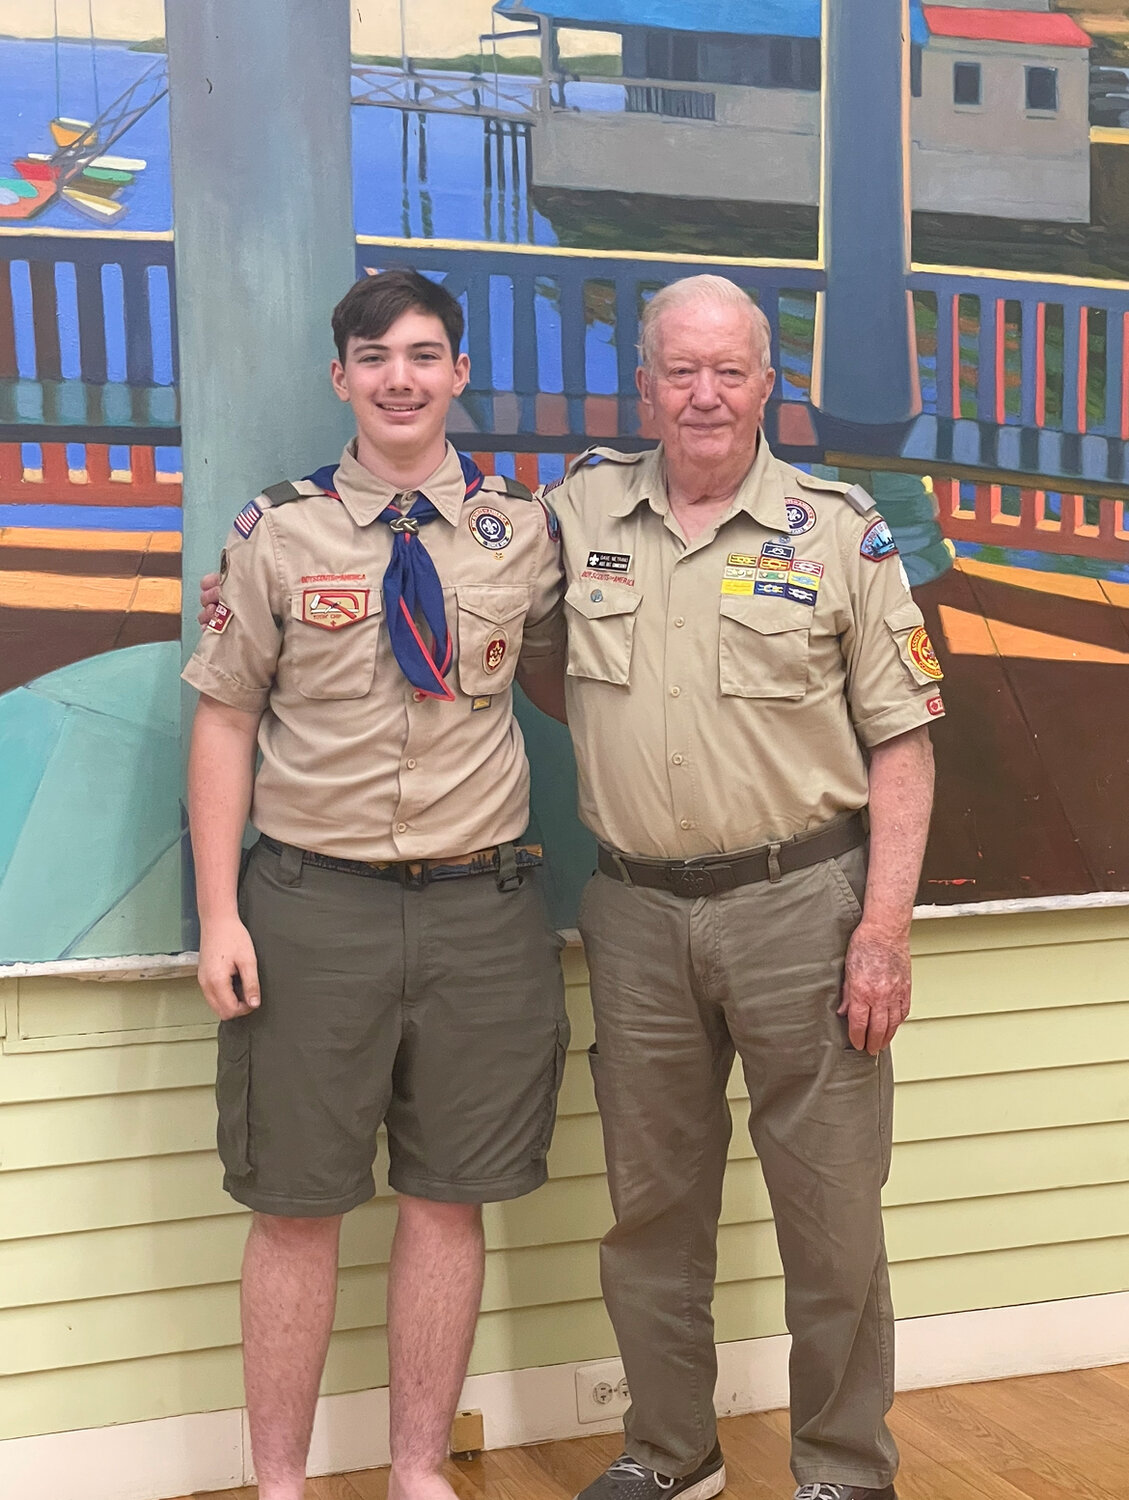 Troop 3’s newest Eagle Scout, Jackson Thomas Surette, poses with his grandfather and sponsor, Dave Metrano, at the Scouts’ Court of Honor.